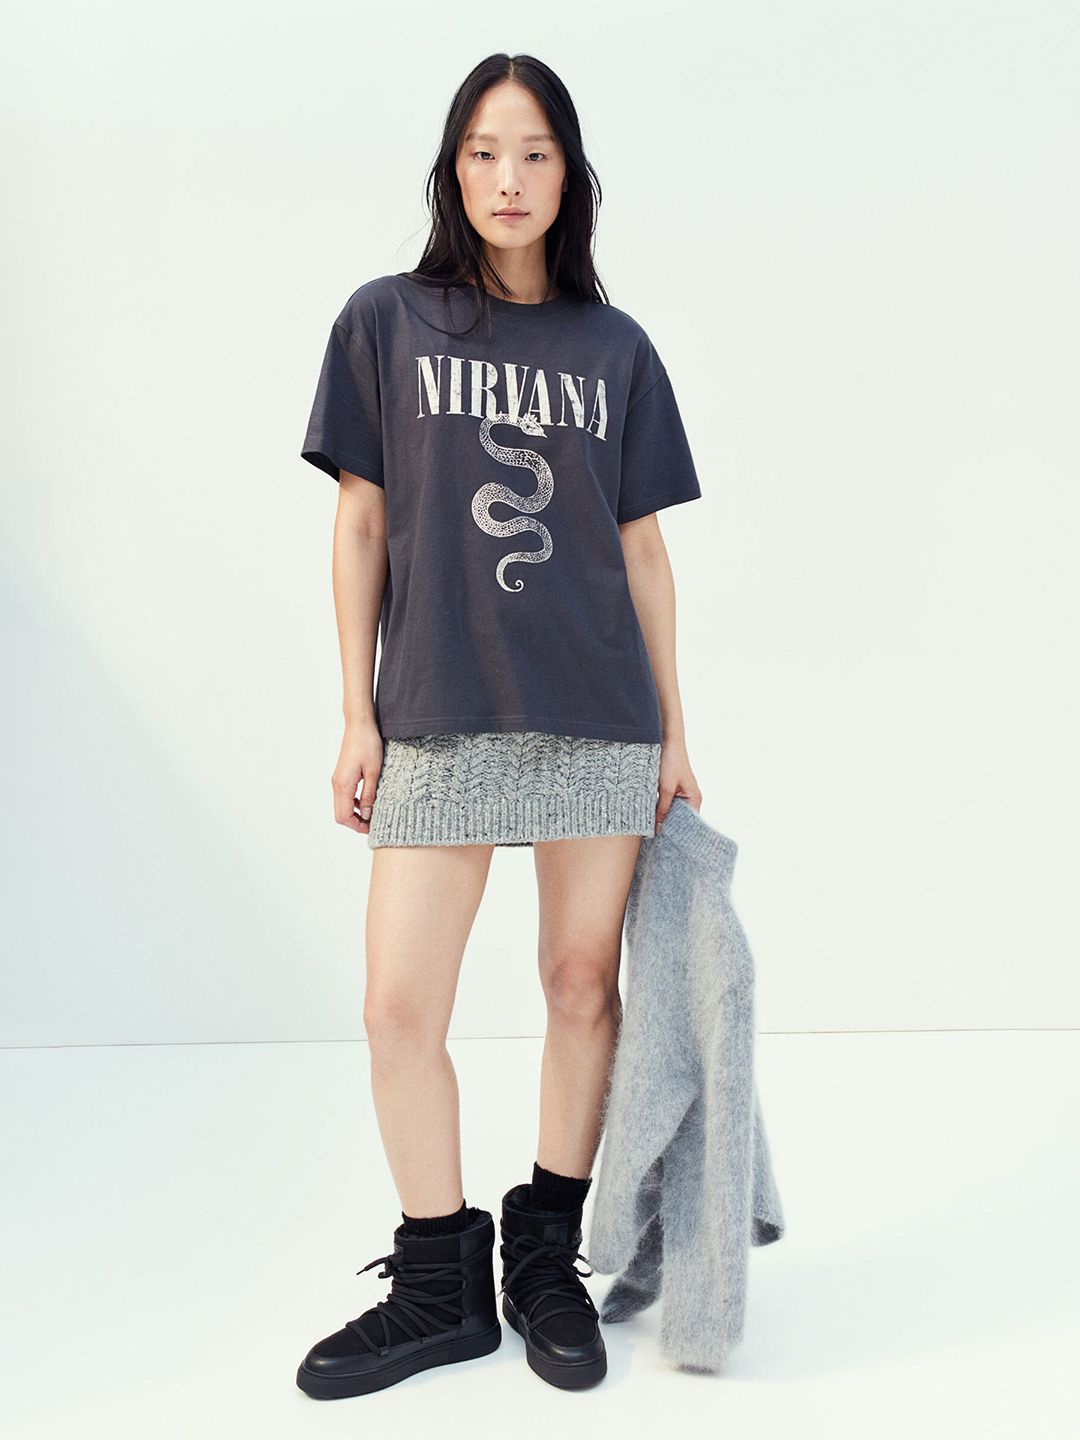 H&M Oversized Nirvana Printed Pure Cotton T-Shirt Price in India